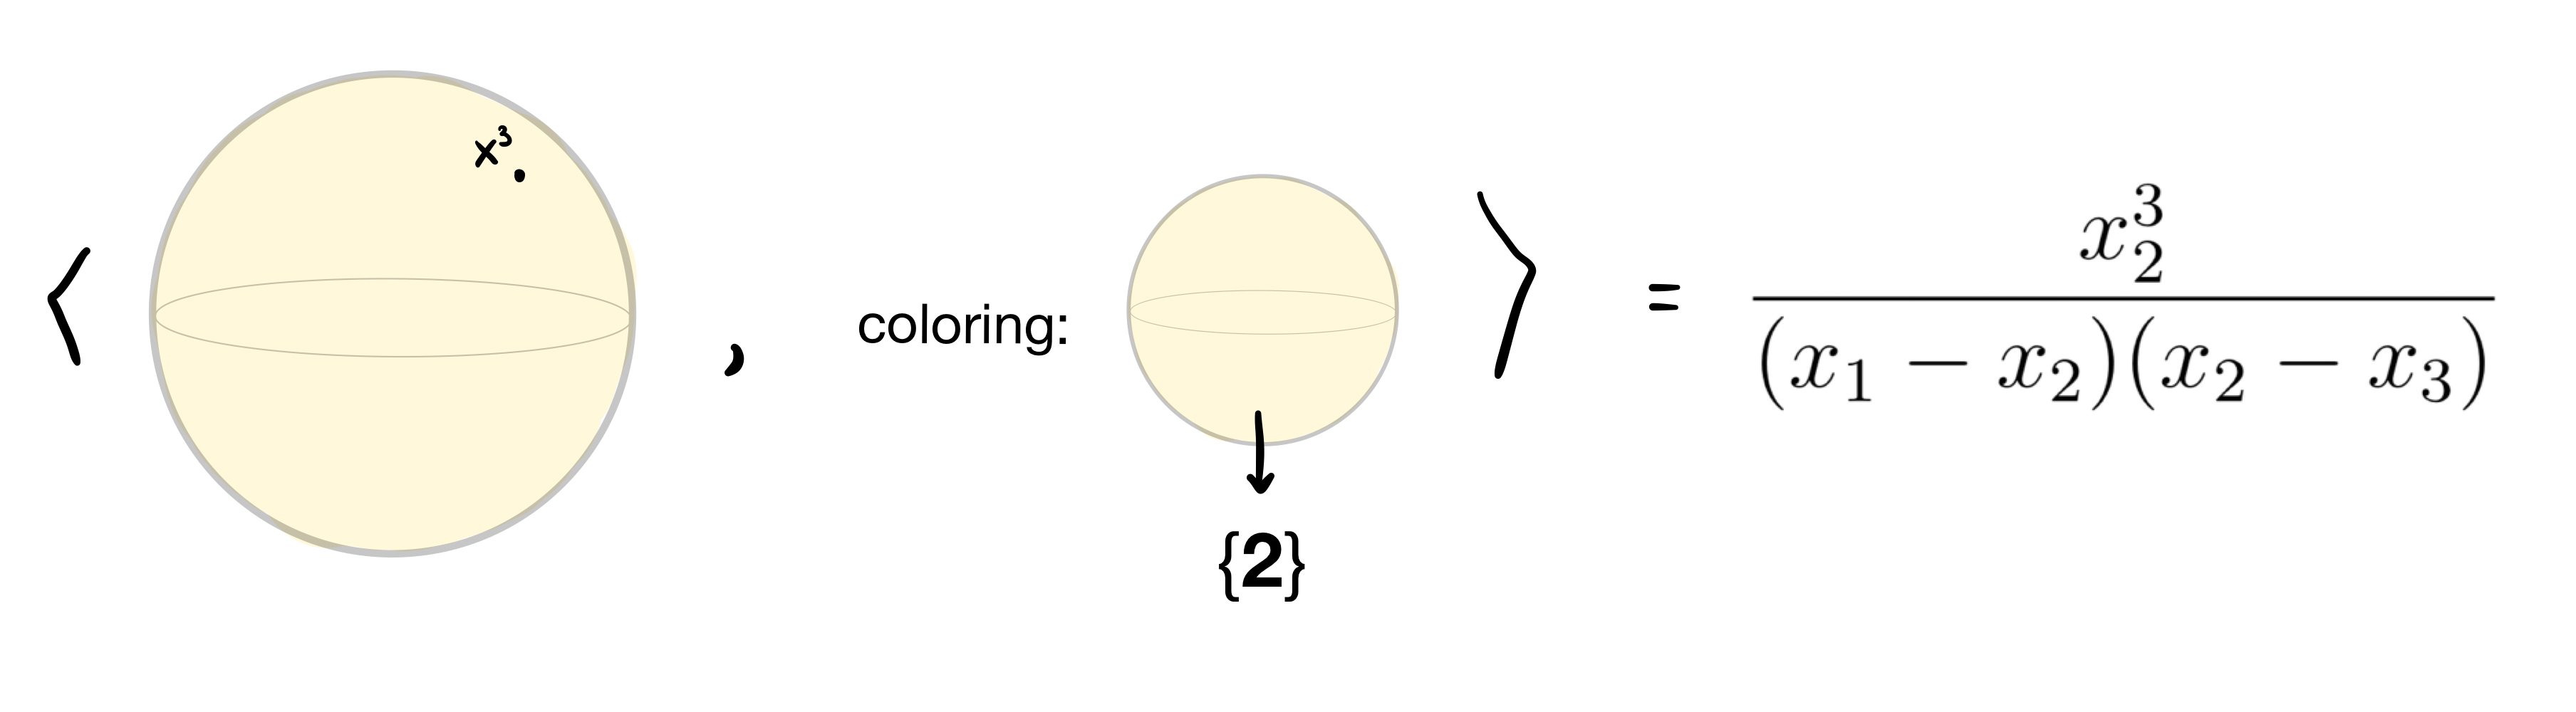 The evaluation of a sphere of thickness 1 with a coloring